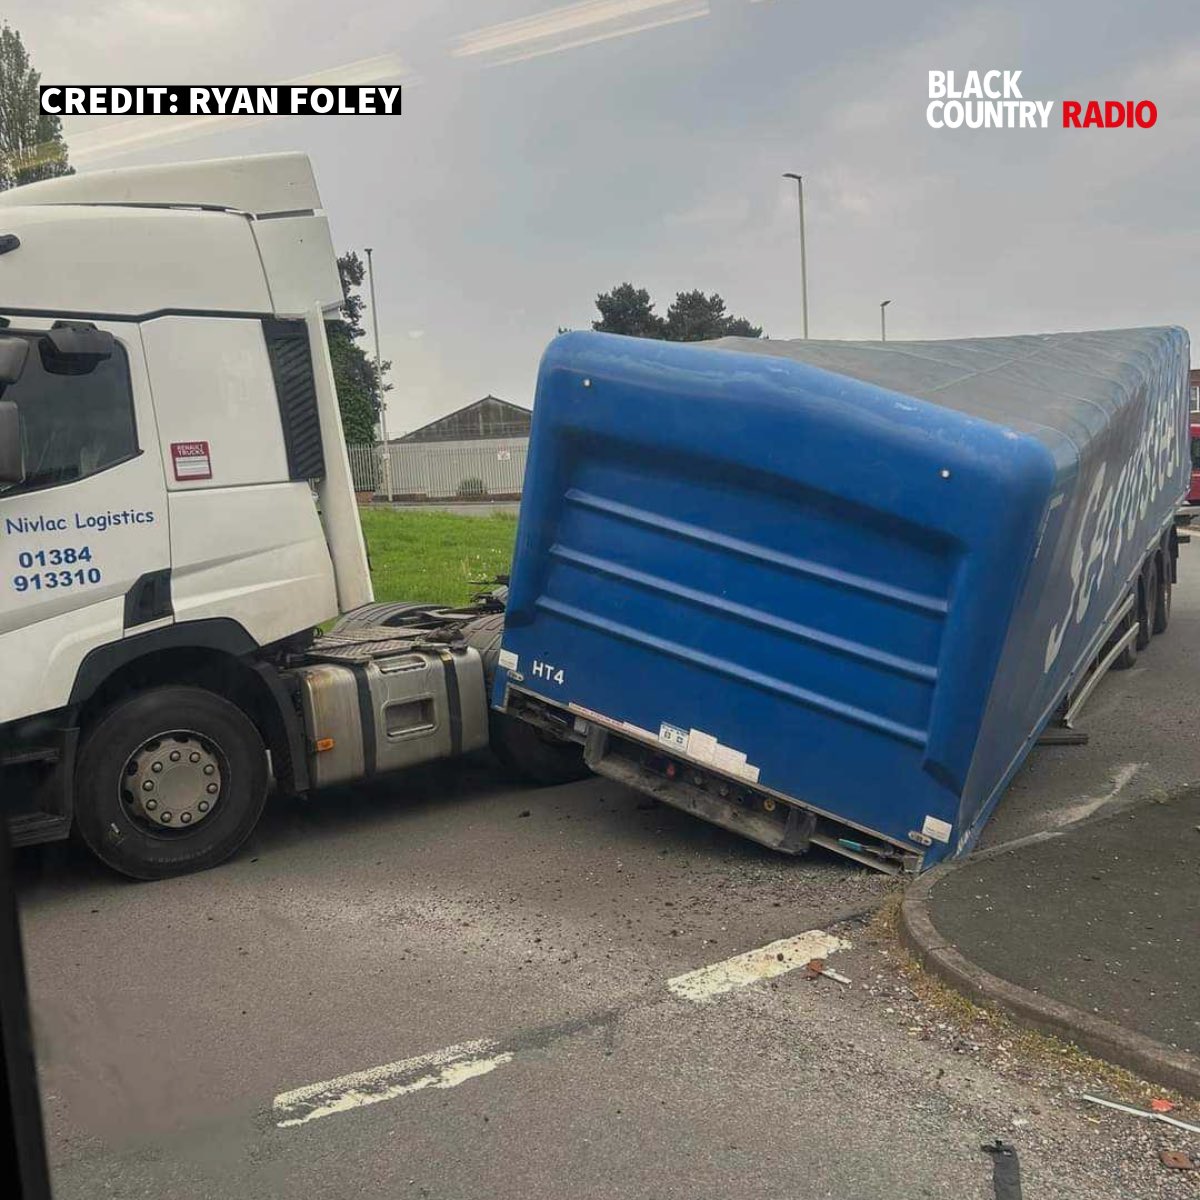 🚘 TRAVEL 🚘 An incident with a lorry on the roundabout outside Russell's Hall Hospital is causing tailbacks in the area. Buses are currently not serving the Hospital.